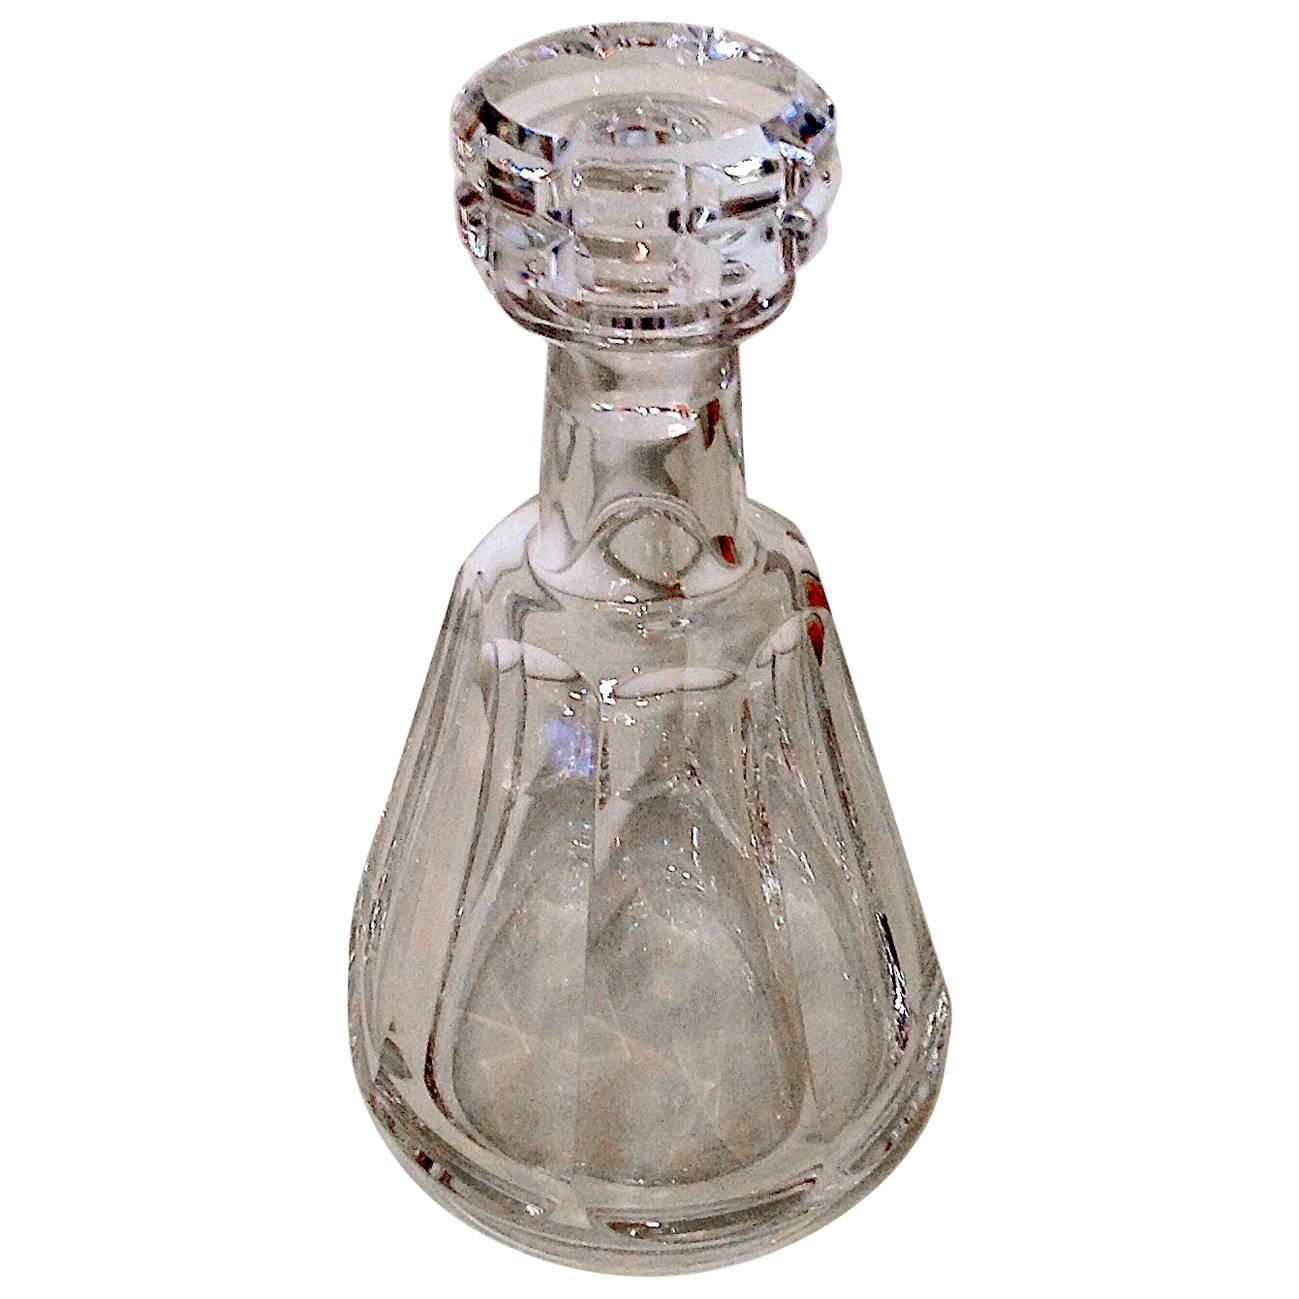 Baccarat Crystal Cordial Decanter and Stopper in Tallyrand